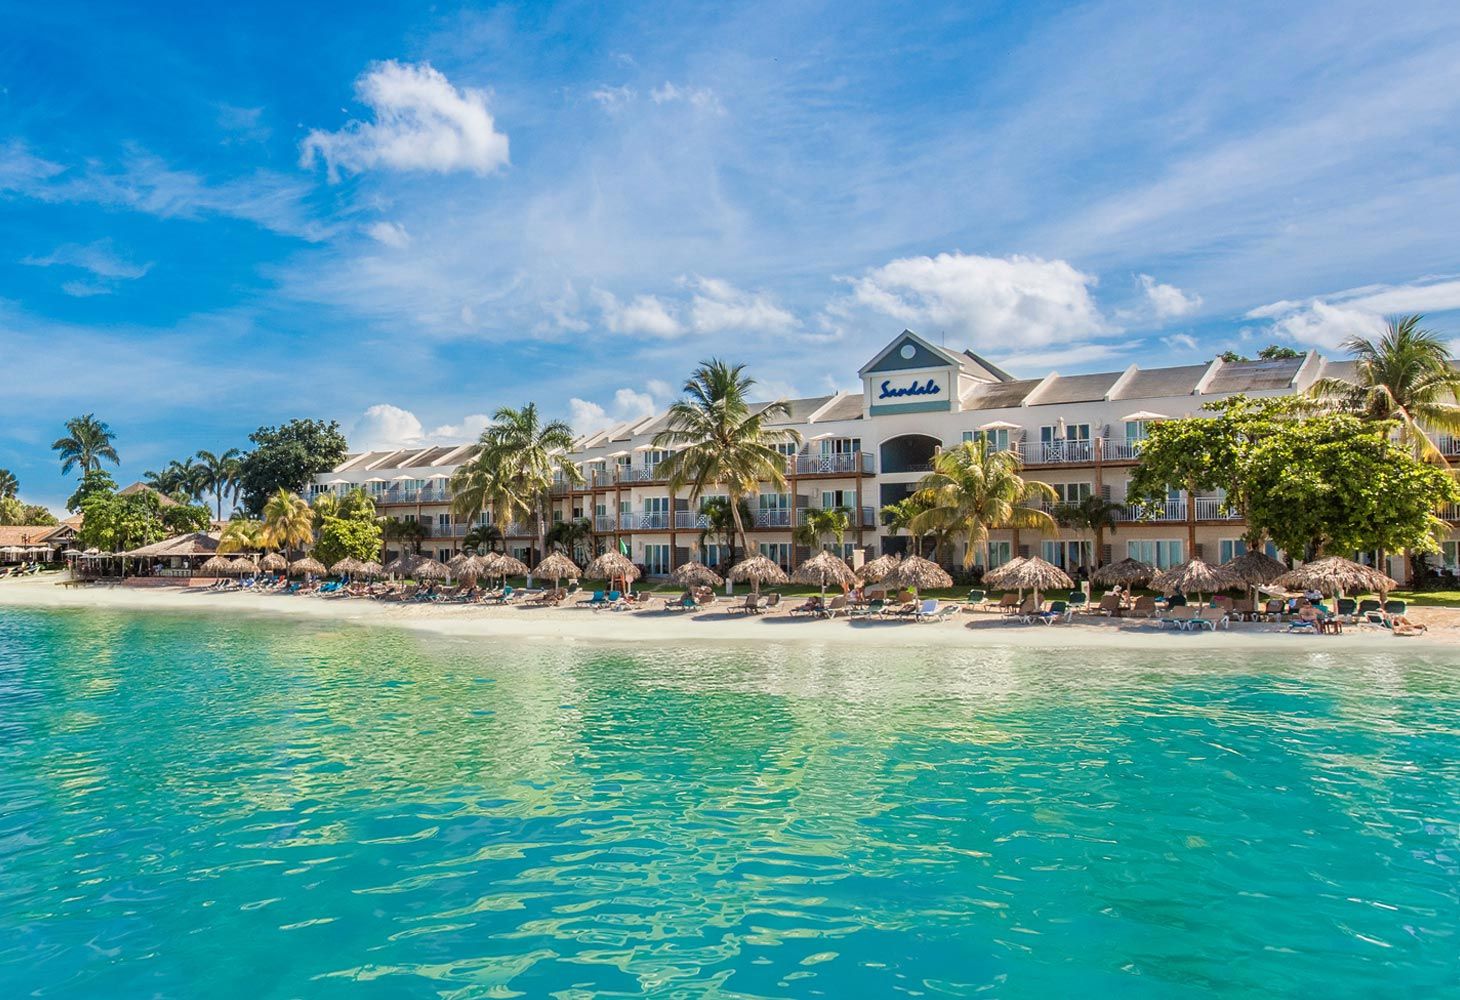 Three things guests love about... Sandals Negril. A full review.